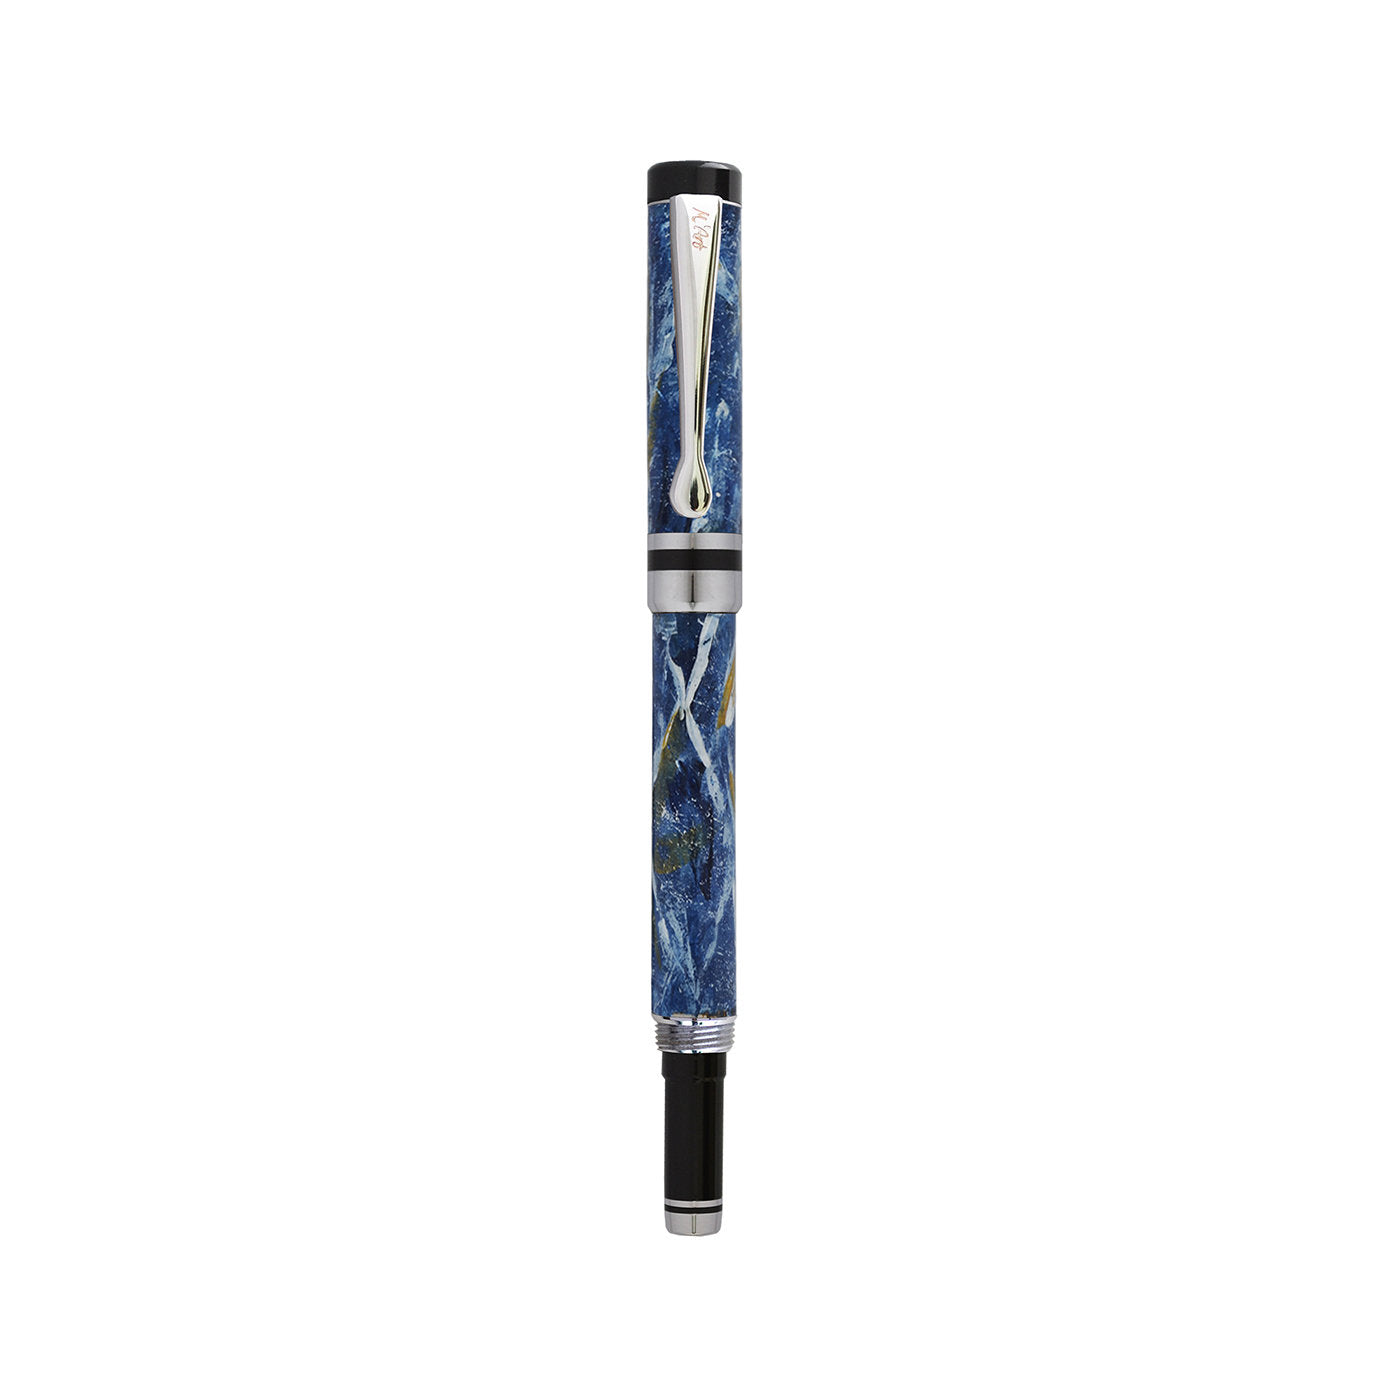 Ipazia Marbled Blue Roller Pen in Olive Wood - Alternative view 1